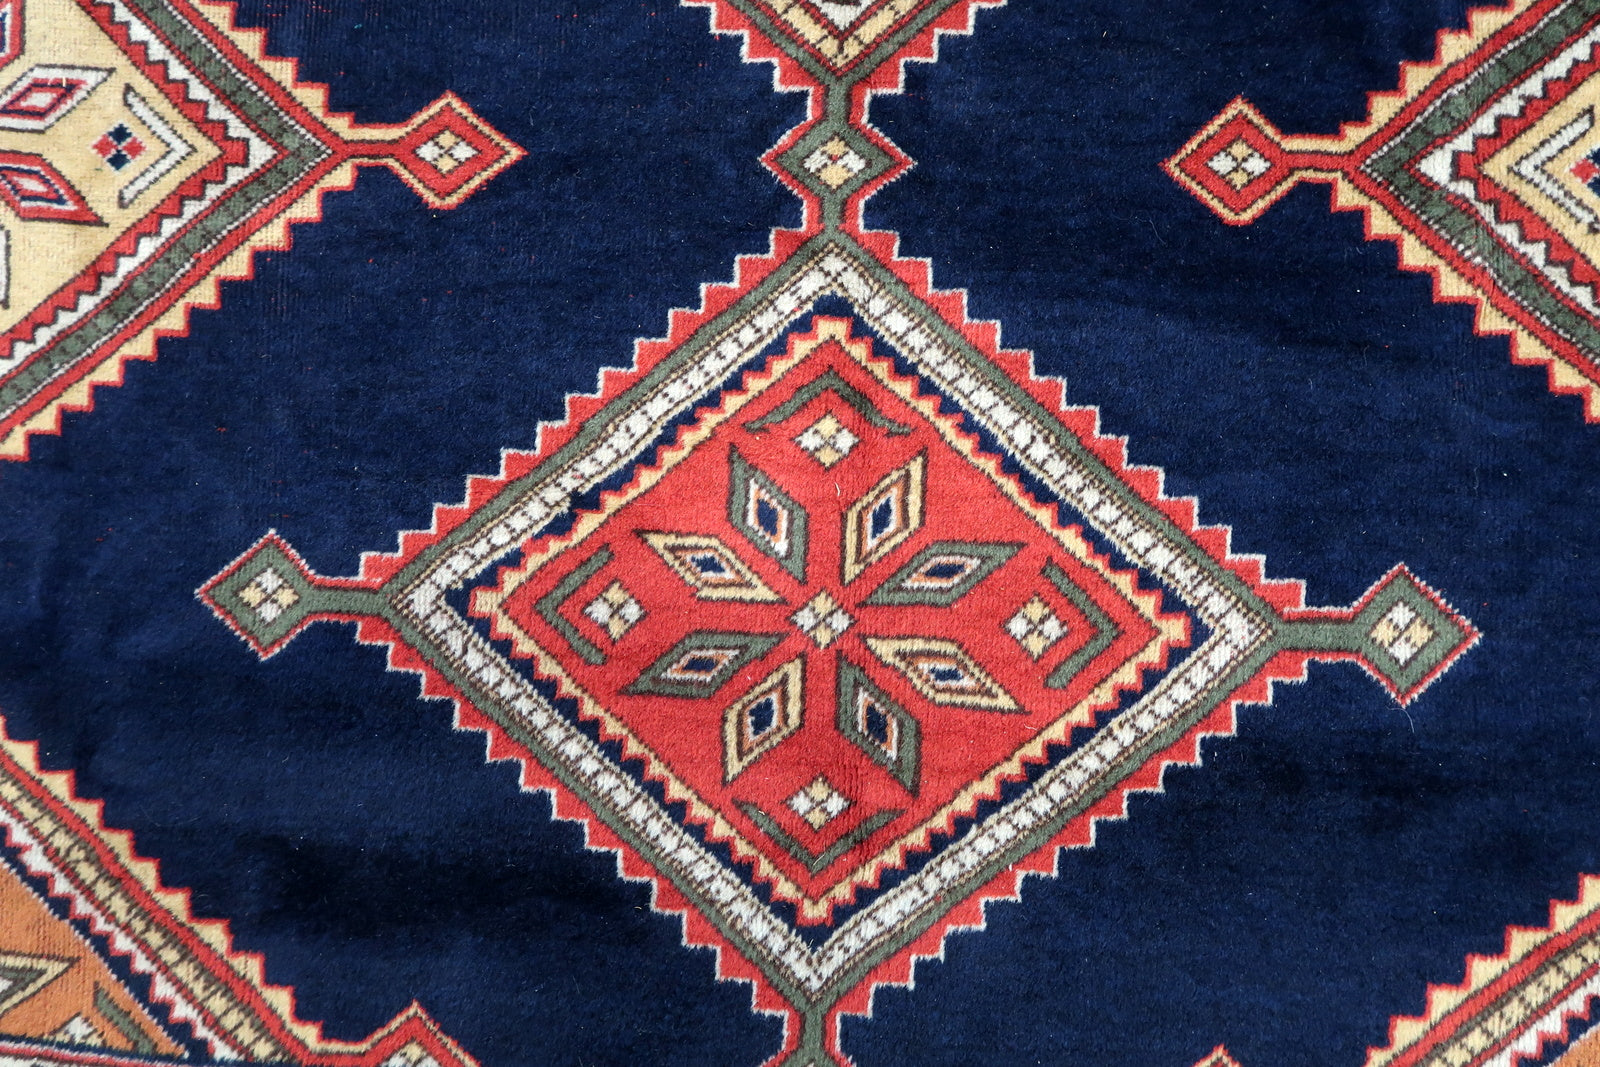 Close-up of the detailed border surrounding the central pattern, enhancing its visual appeal